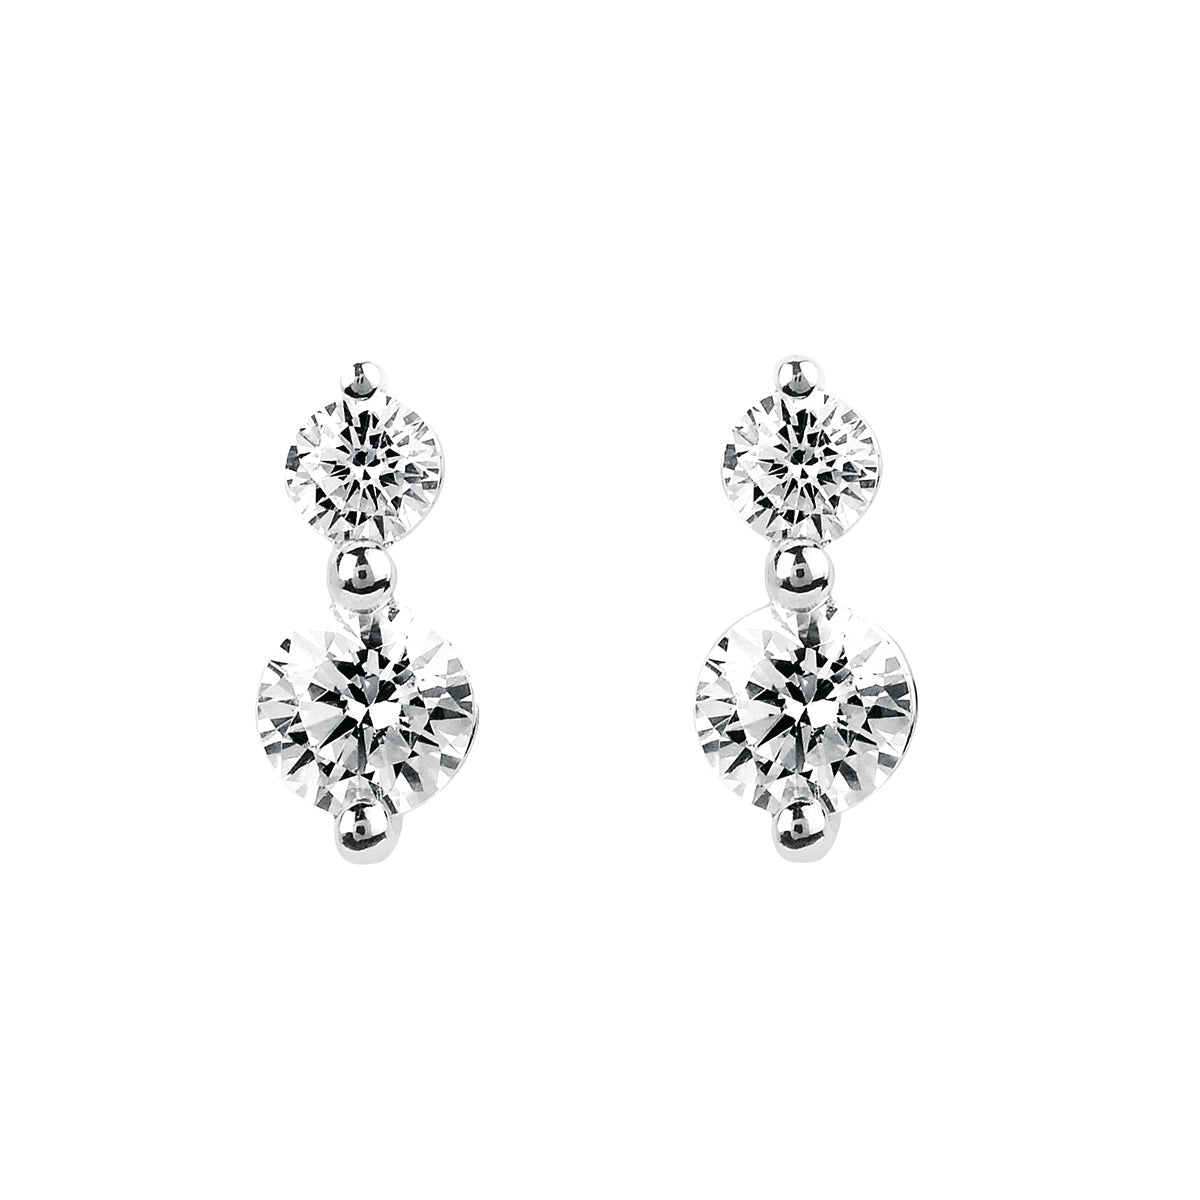 Two Diamond Drop Earrings in White, Yellow or Rose Gold - Talisman Collection Fine Jewelers